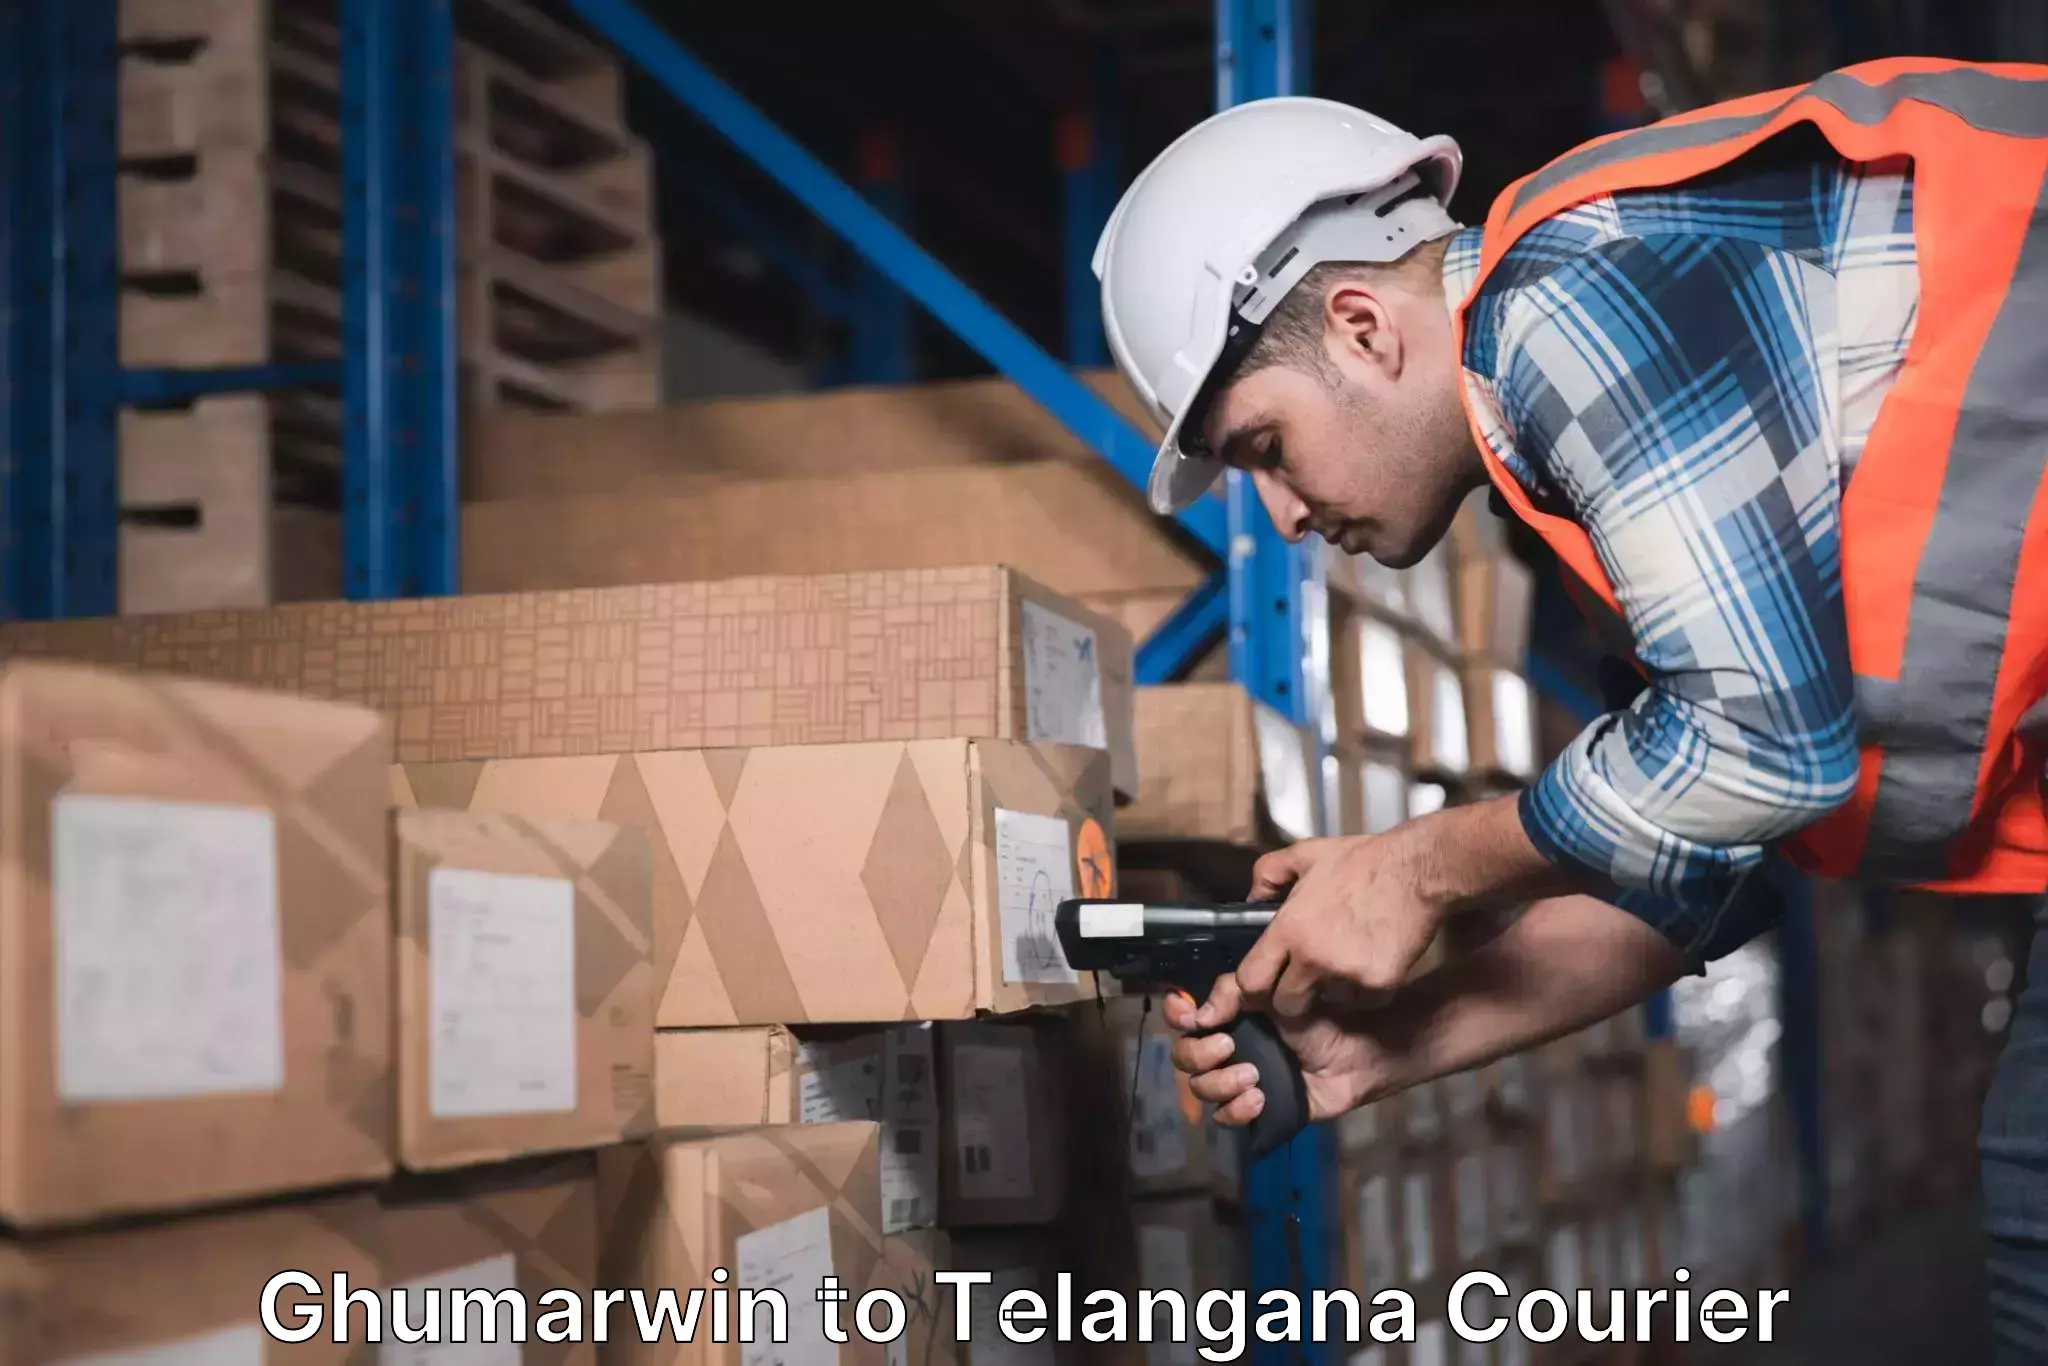 Subscription-based courier Ghumarwin to Jangaon